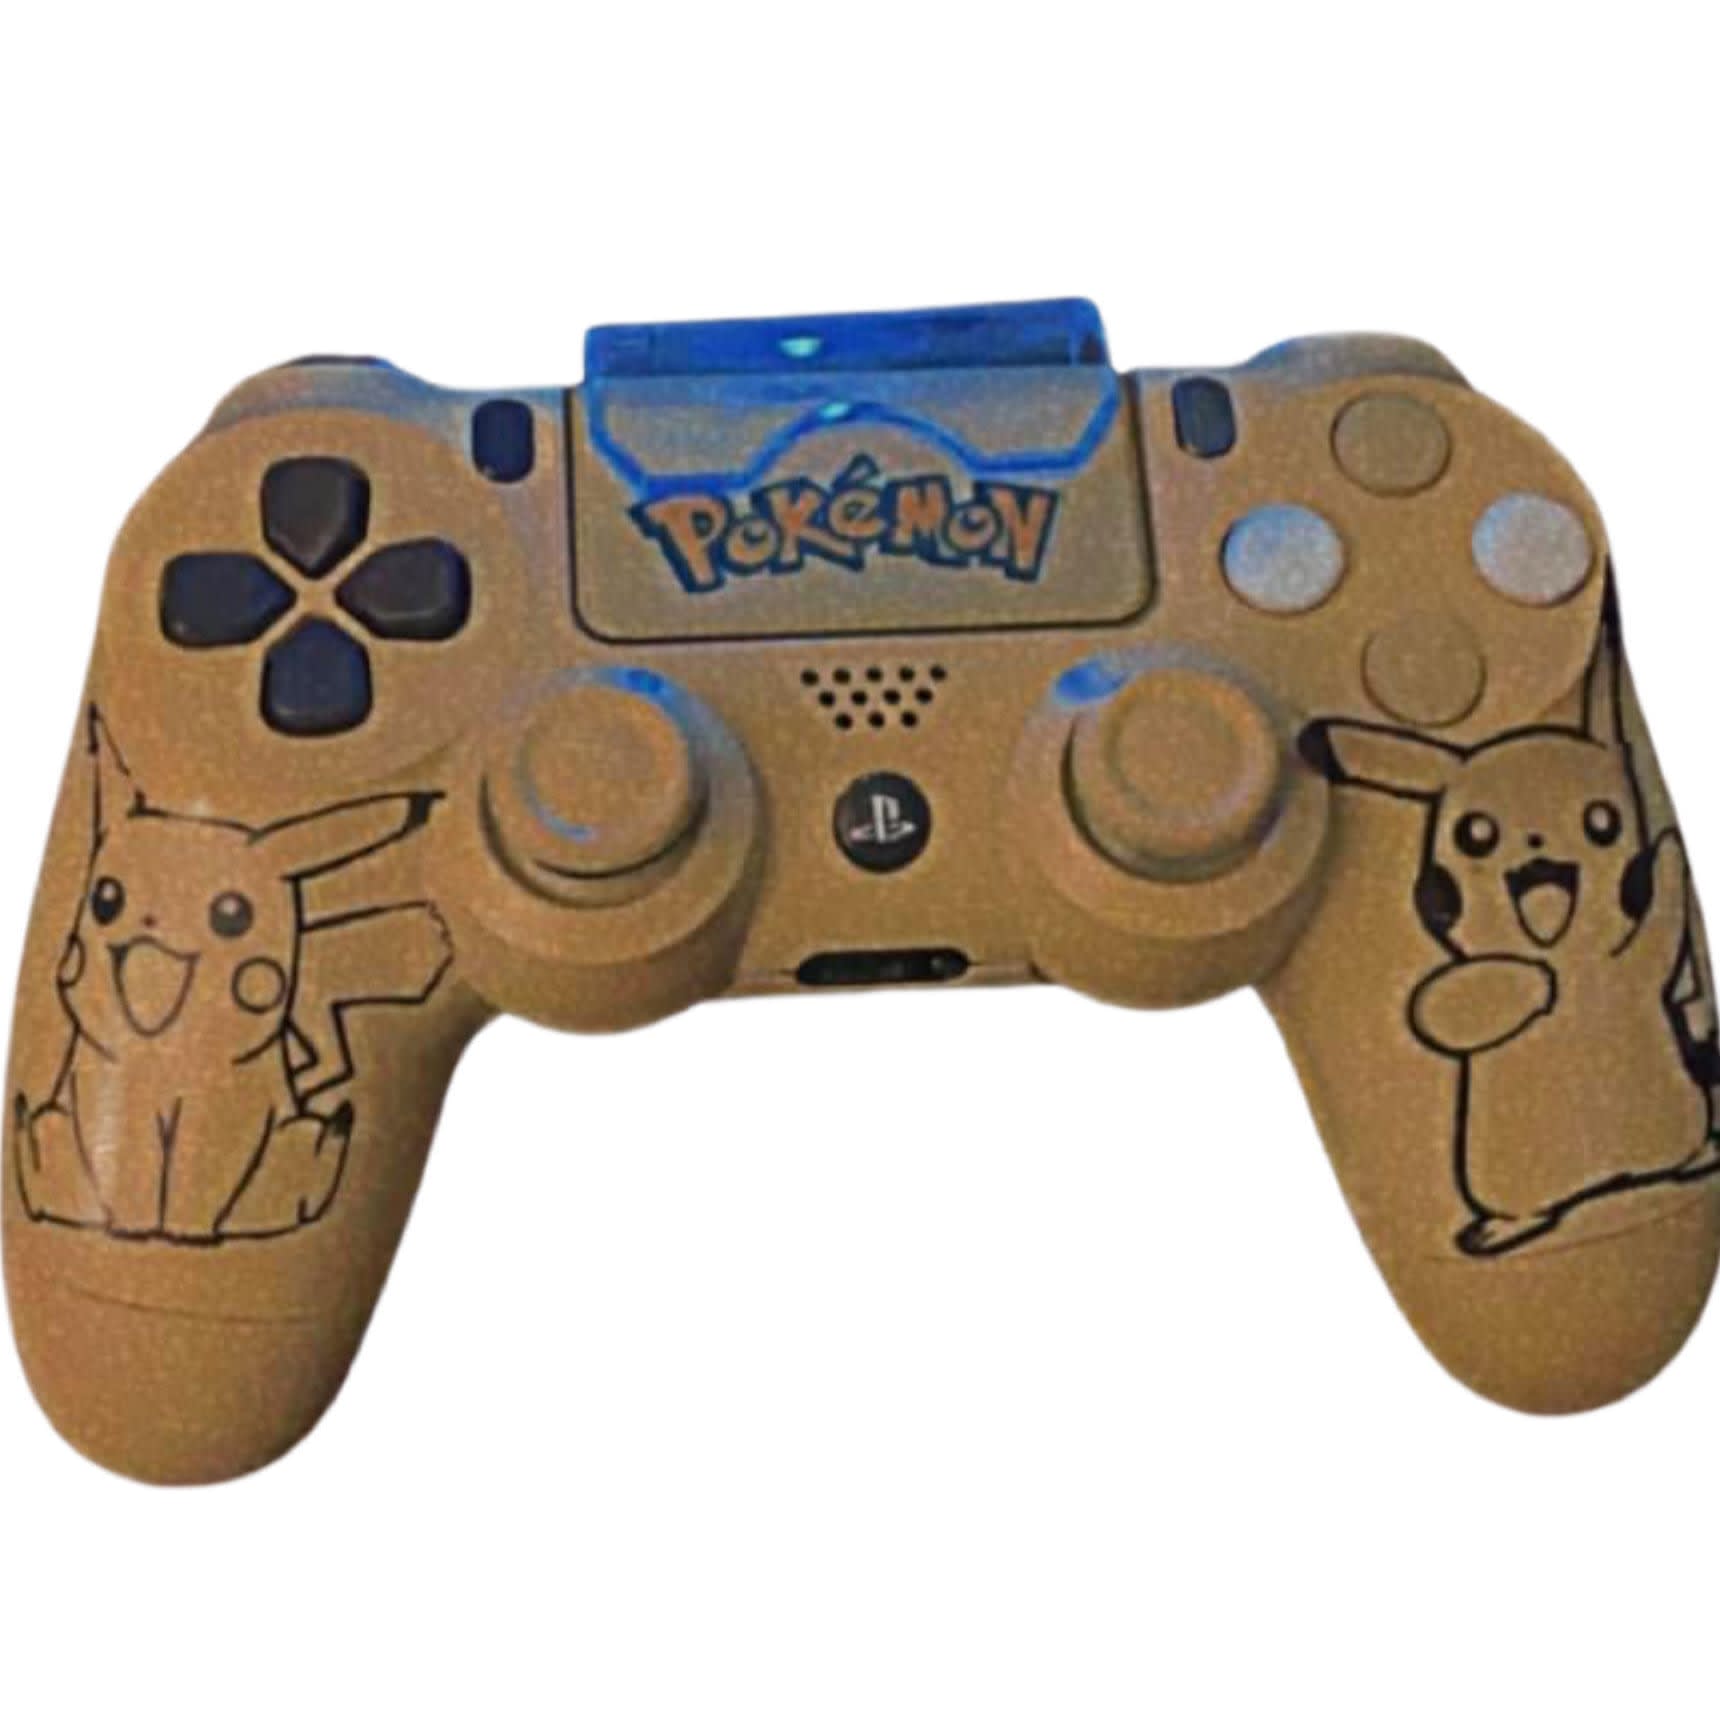 Yu-Gi-Oh! custom ps5 controller - MODDED Controllers - Modded